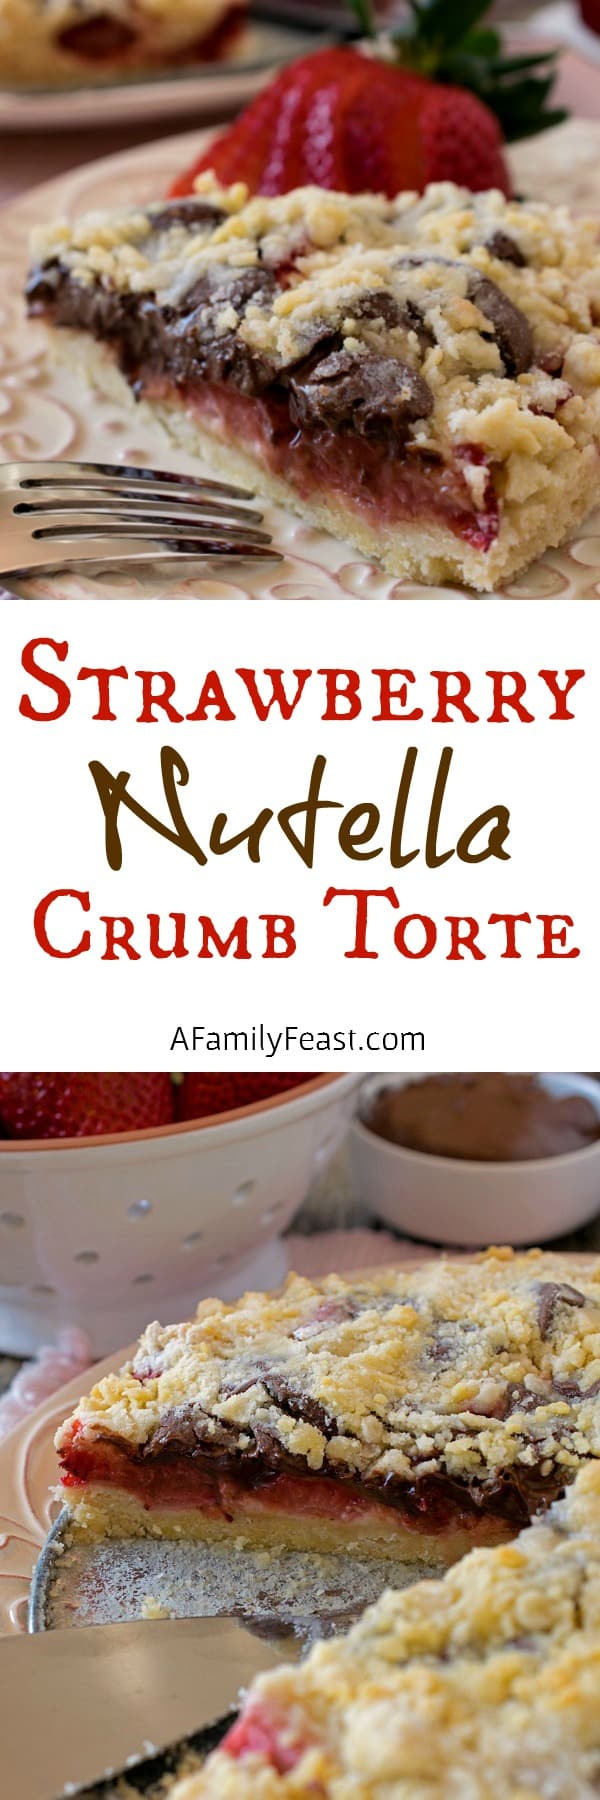 Strawberry Nutella Crumb Torte - A decadently delicious dessert! A light, buttery crumb cake filled with fresh strawberries and Nutella. 